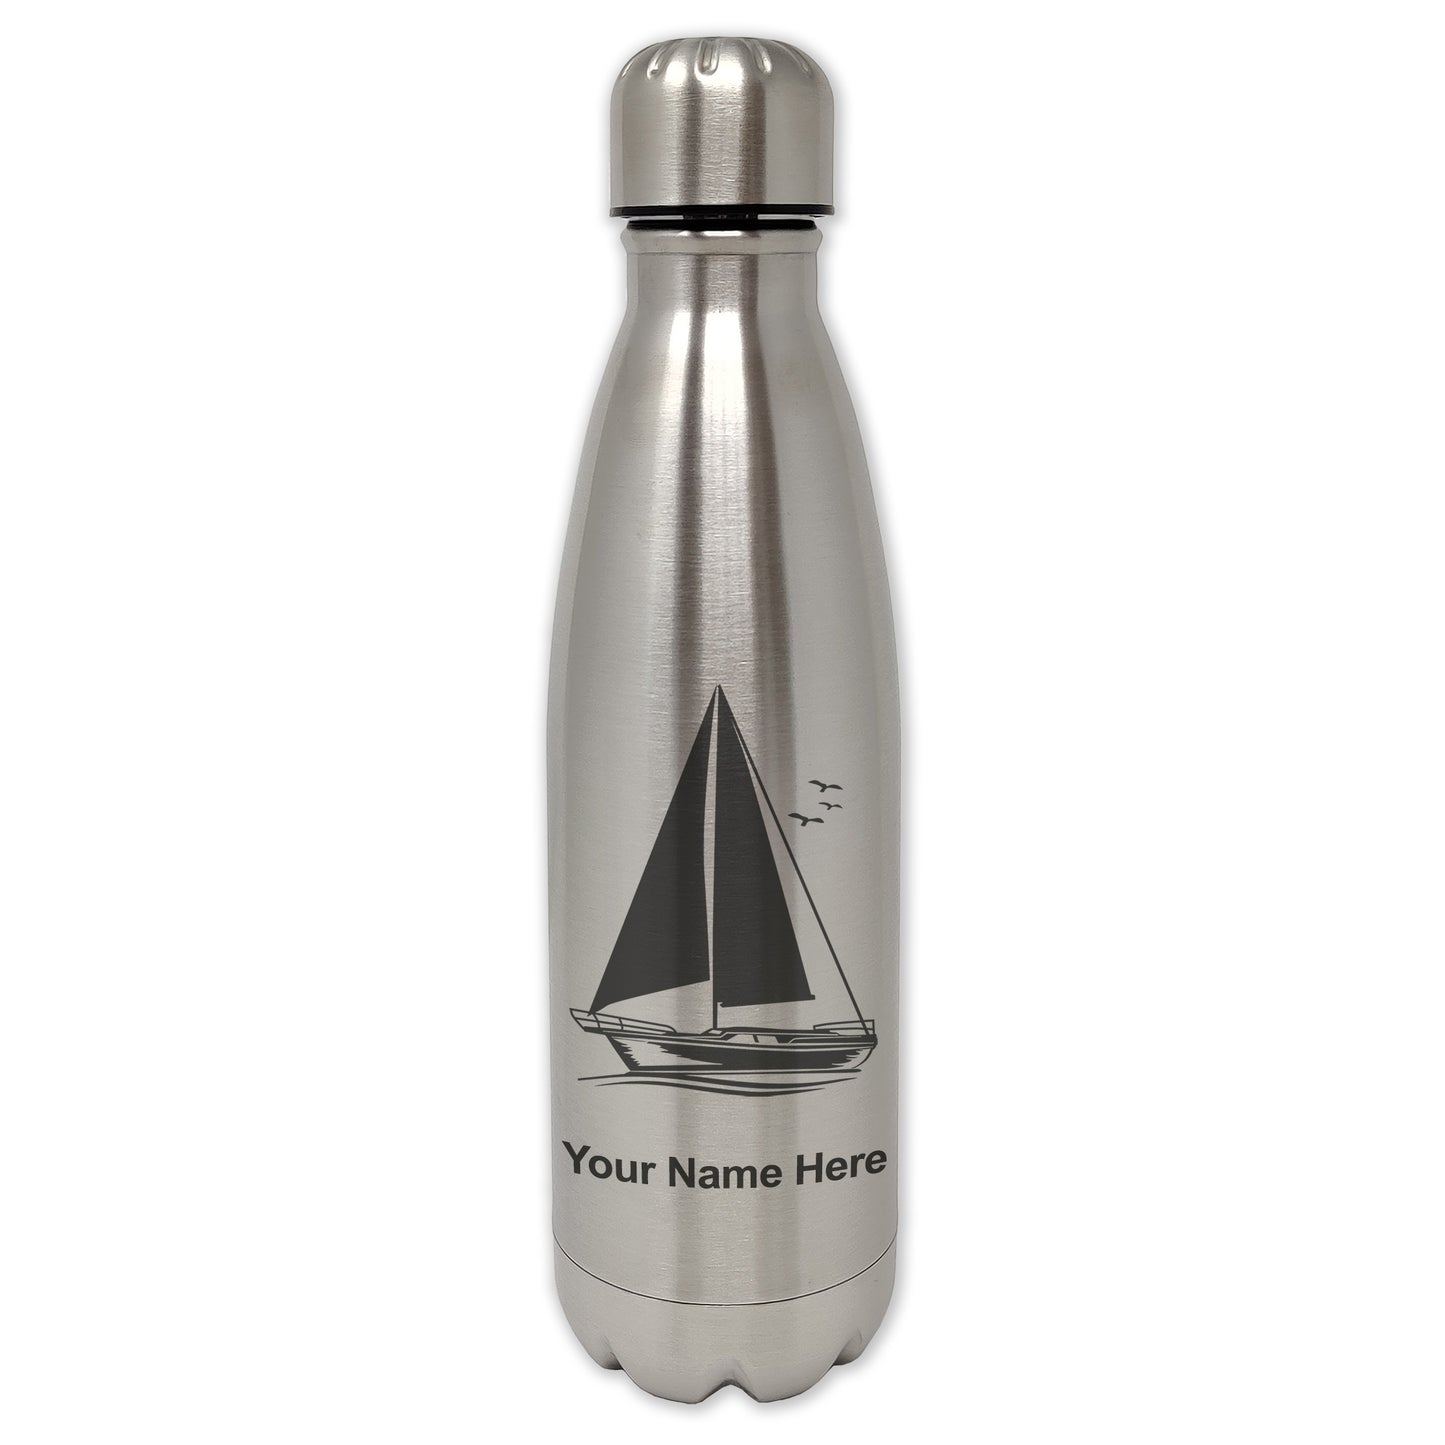 LaserGram Single Wall Water Bottle, Sailboat, Personalized Engraving Included